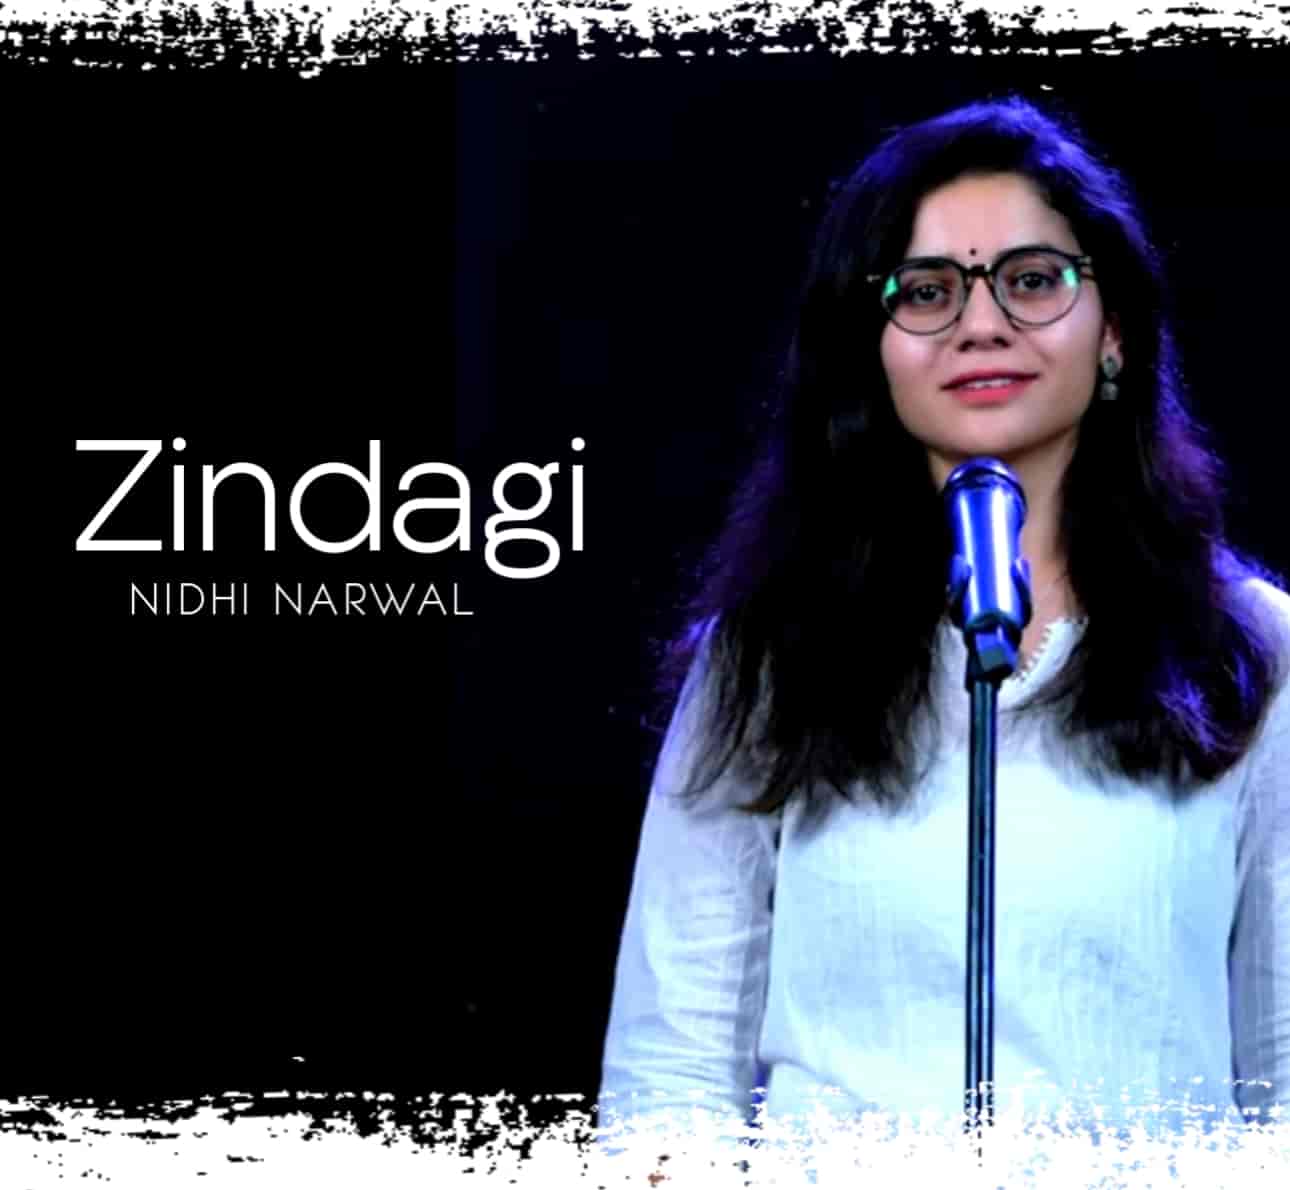 A very young, Famous and YouTube poetess Nidhi Narwal come back again with a beautiful poerty which is titled 'Zindagi'.